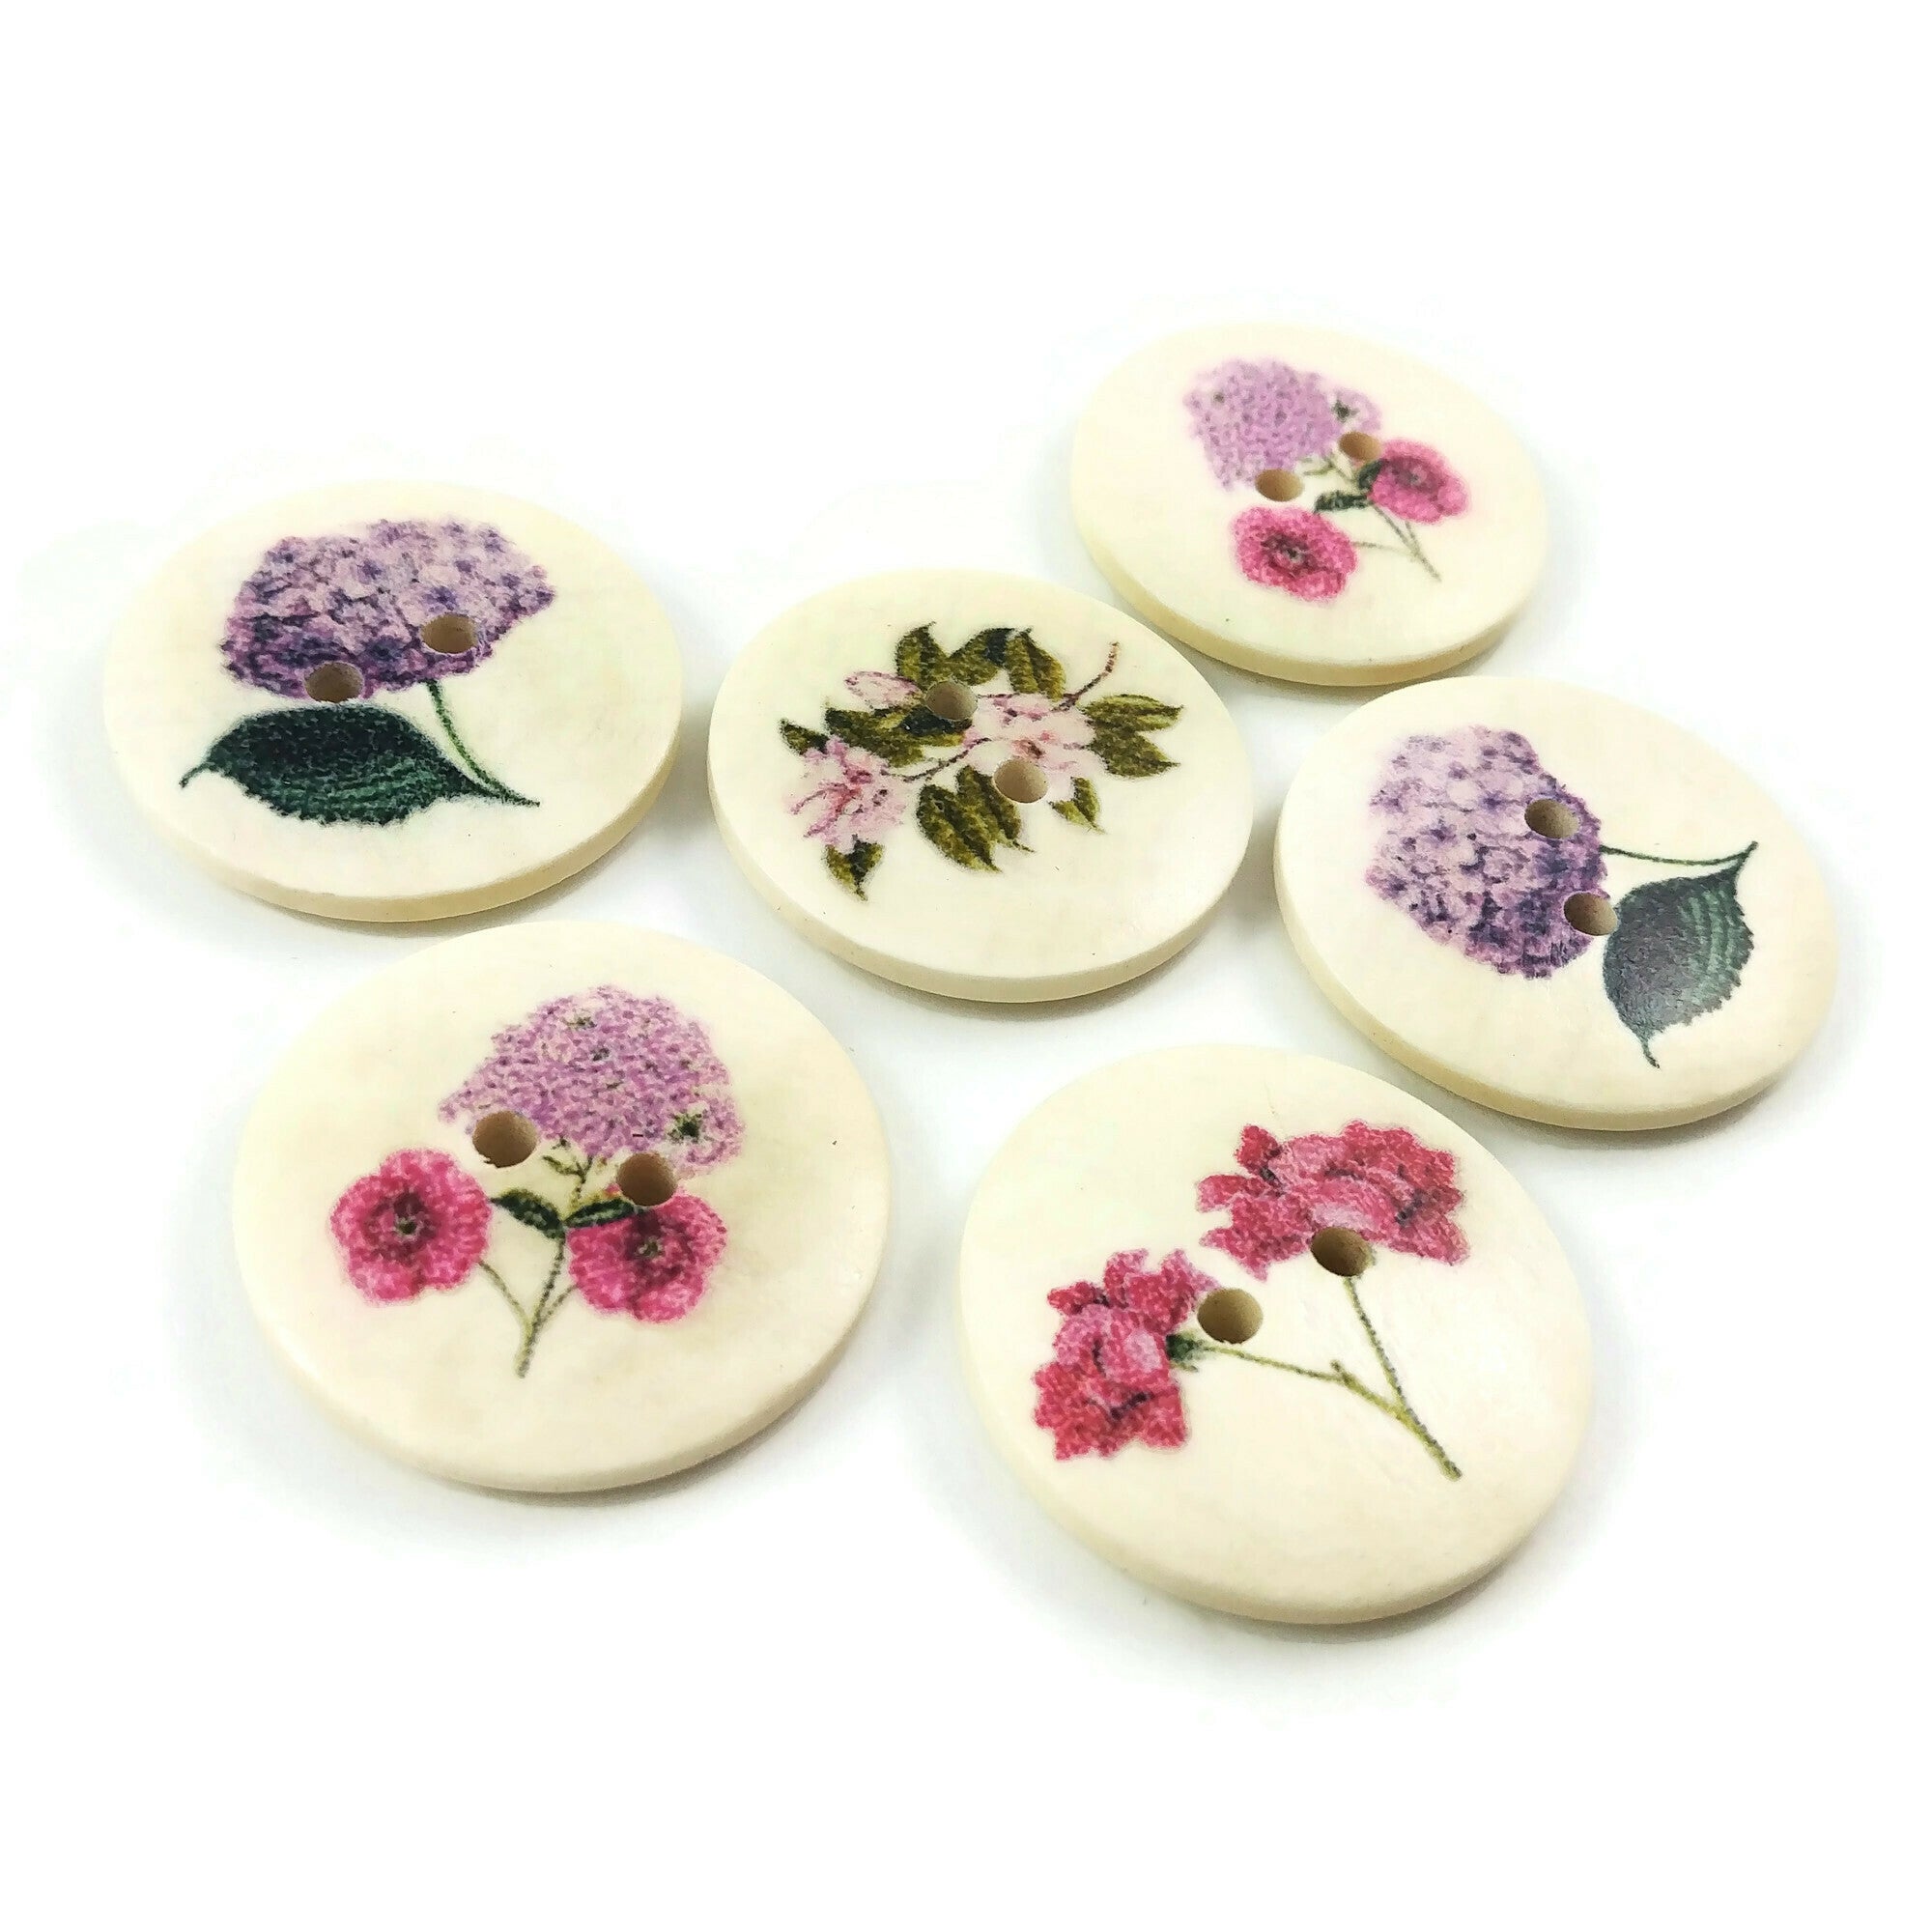 Flower wood sewing buttons - 6 Mixed Patterns craft buttons